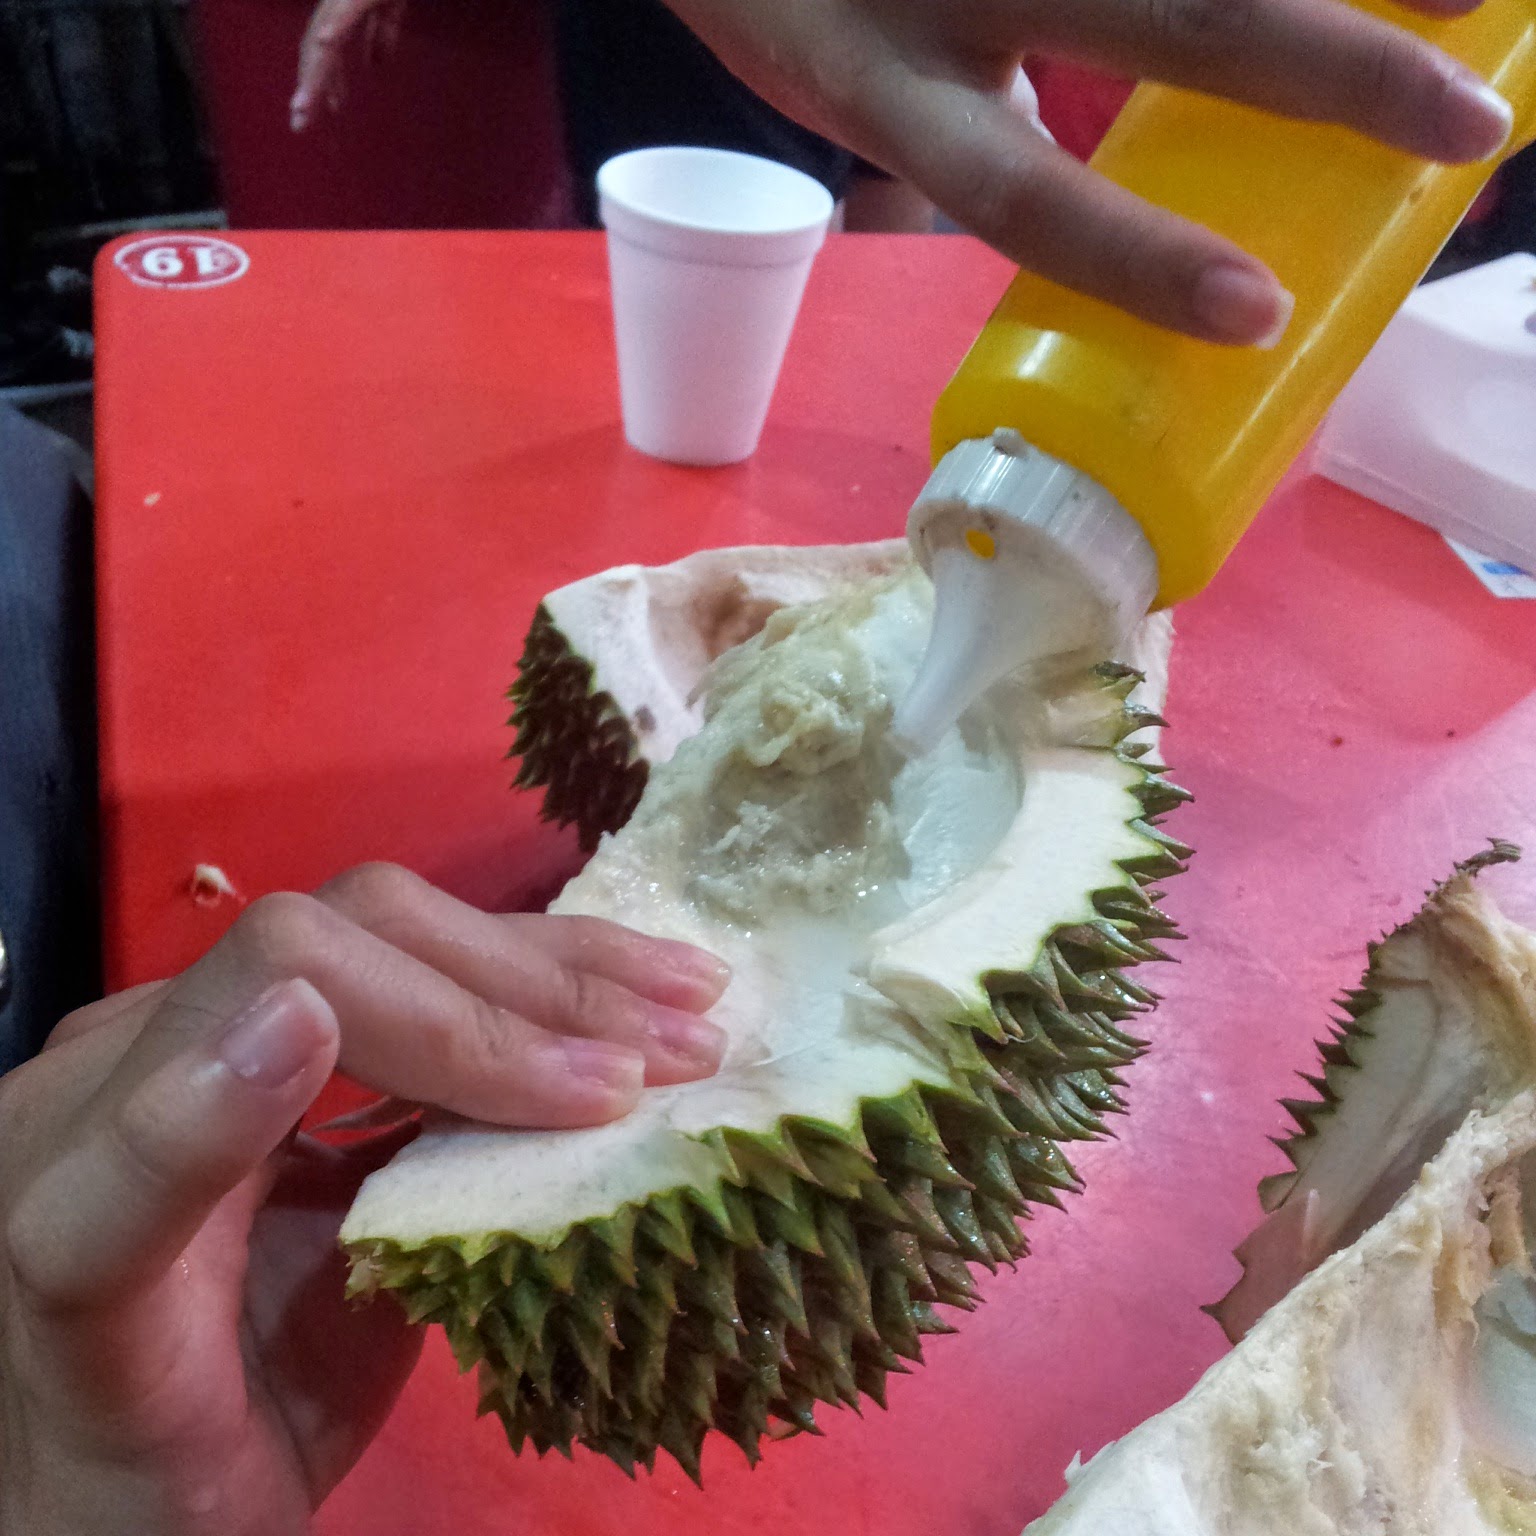 Some drink salt water in durian shells to cool themselves after eating durian. Img from michnoms' blogspot.